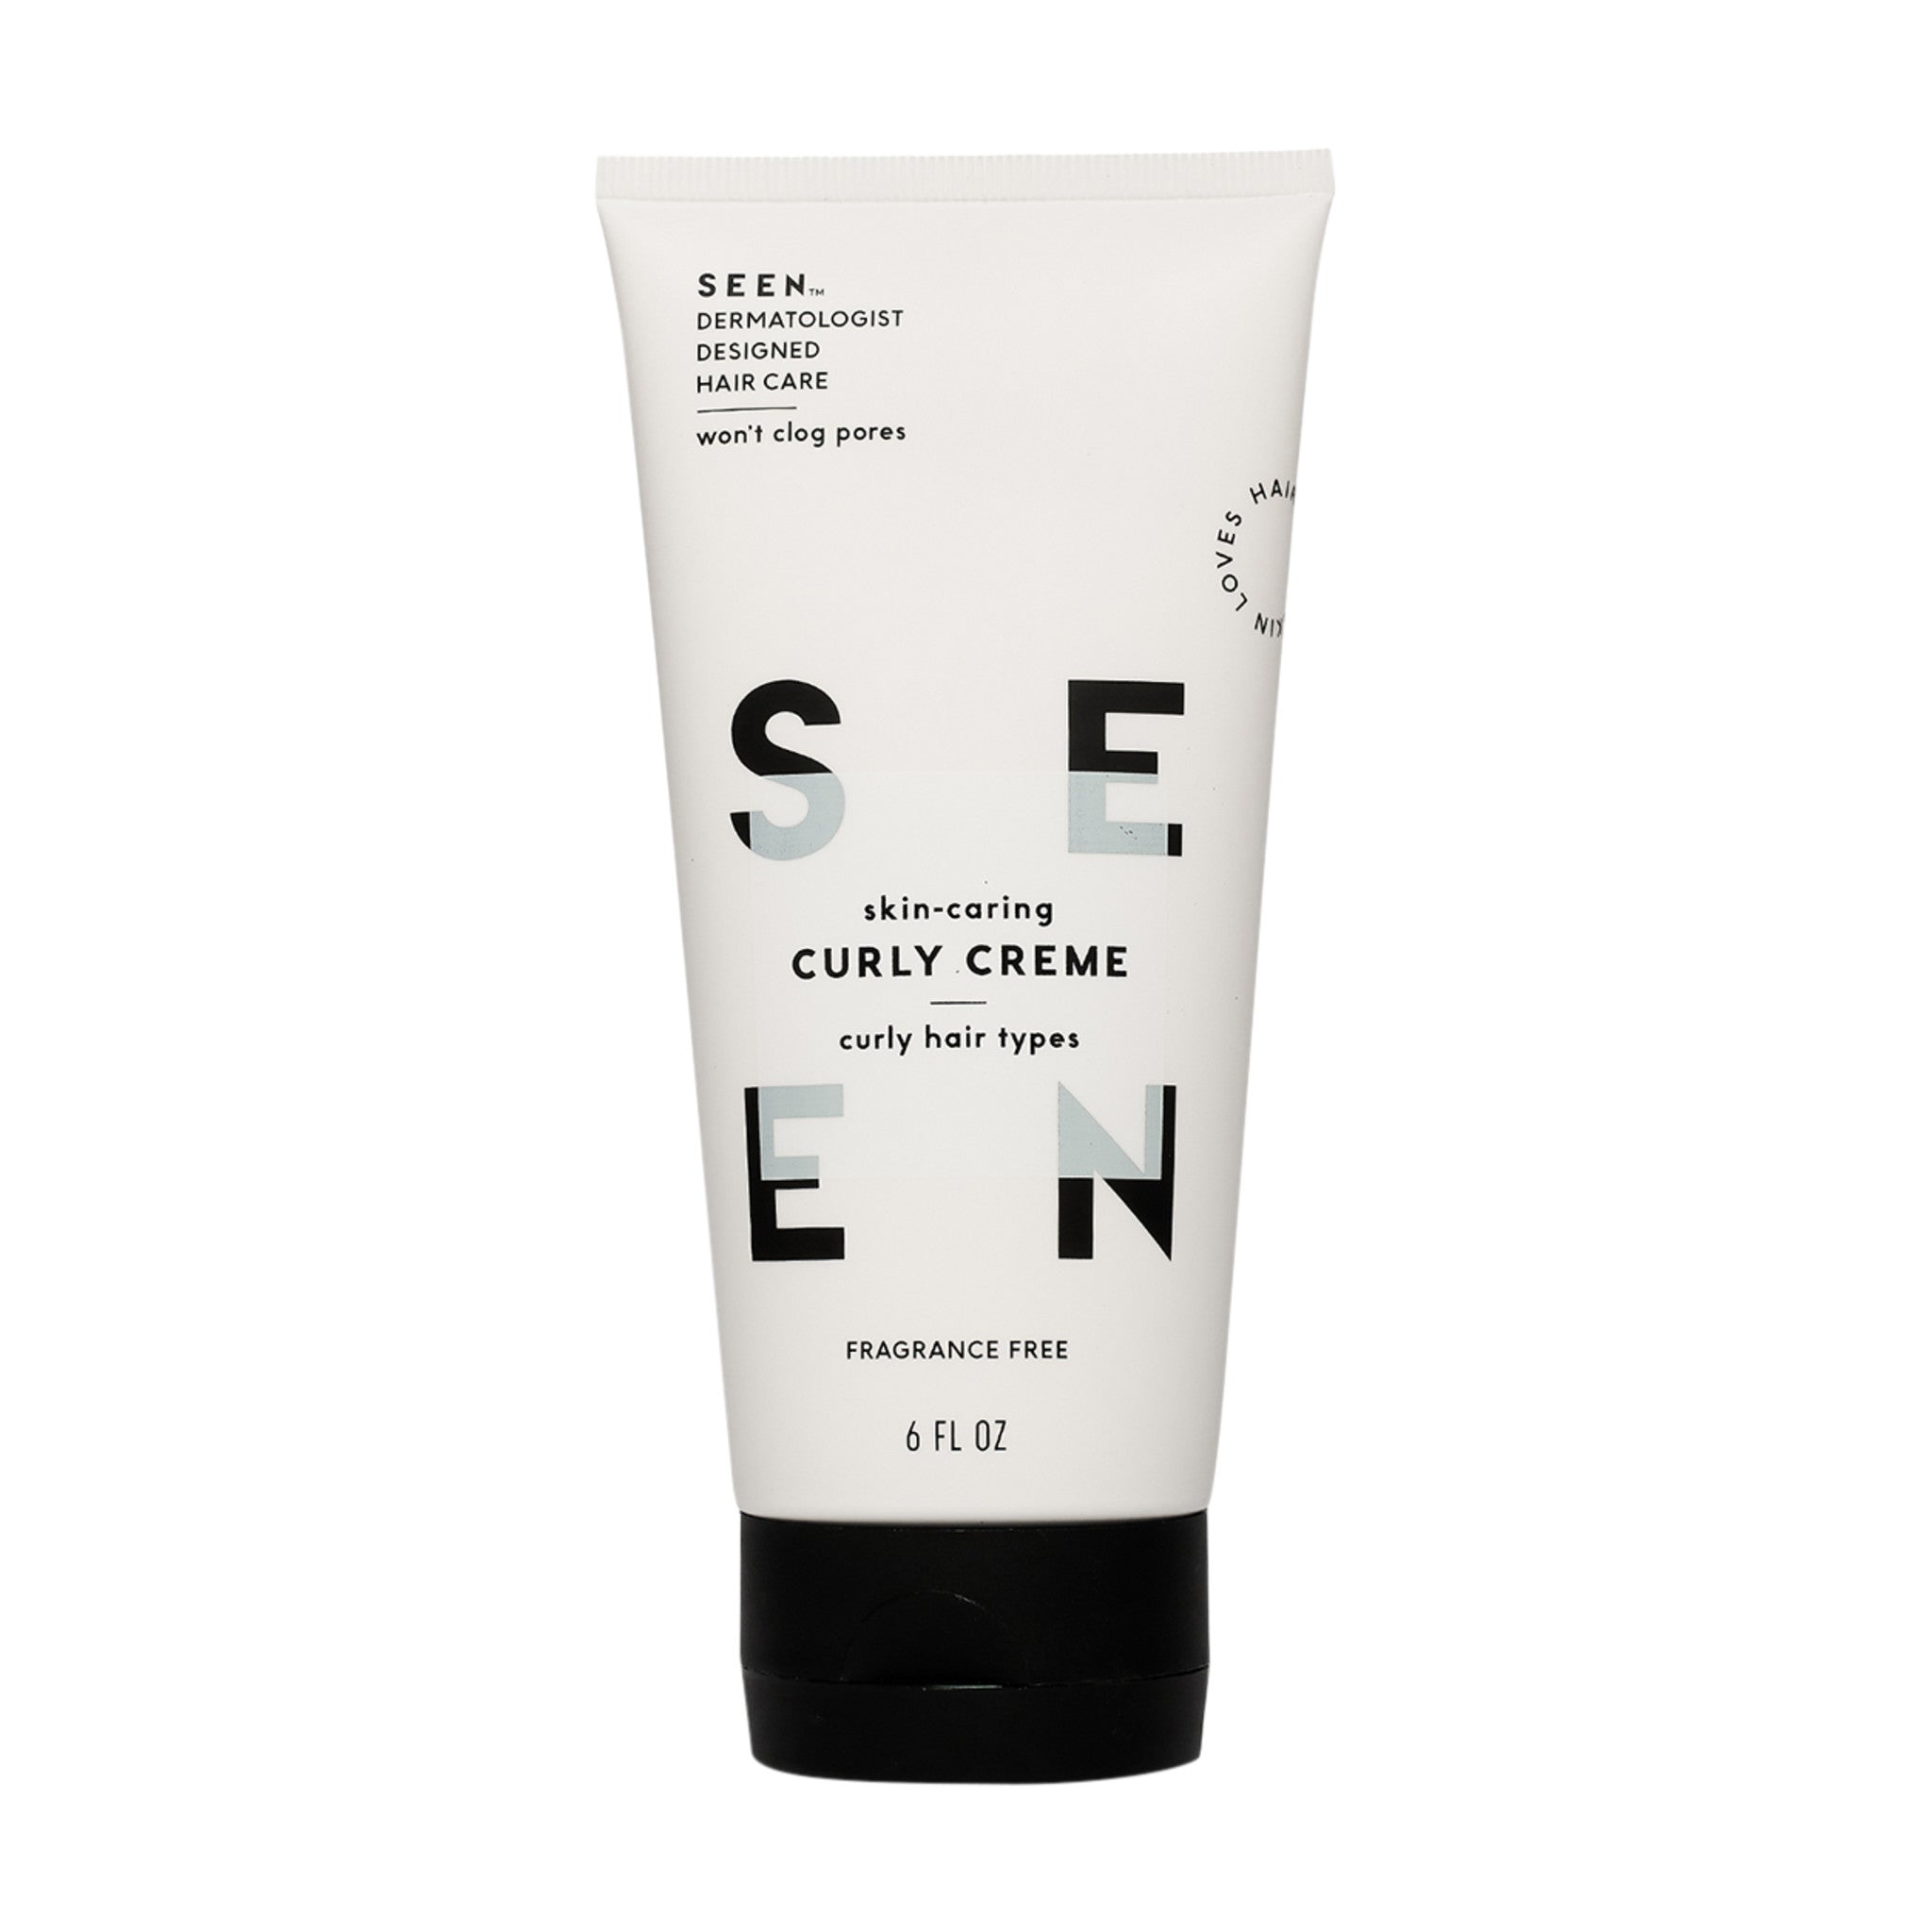 Seen Curly Creme Fragrance Free Size variant: 6 fl oz main image.